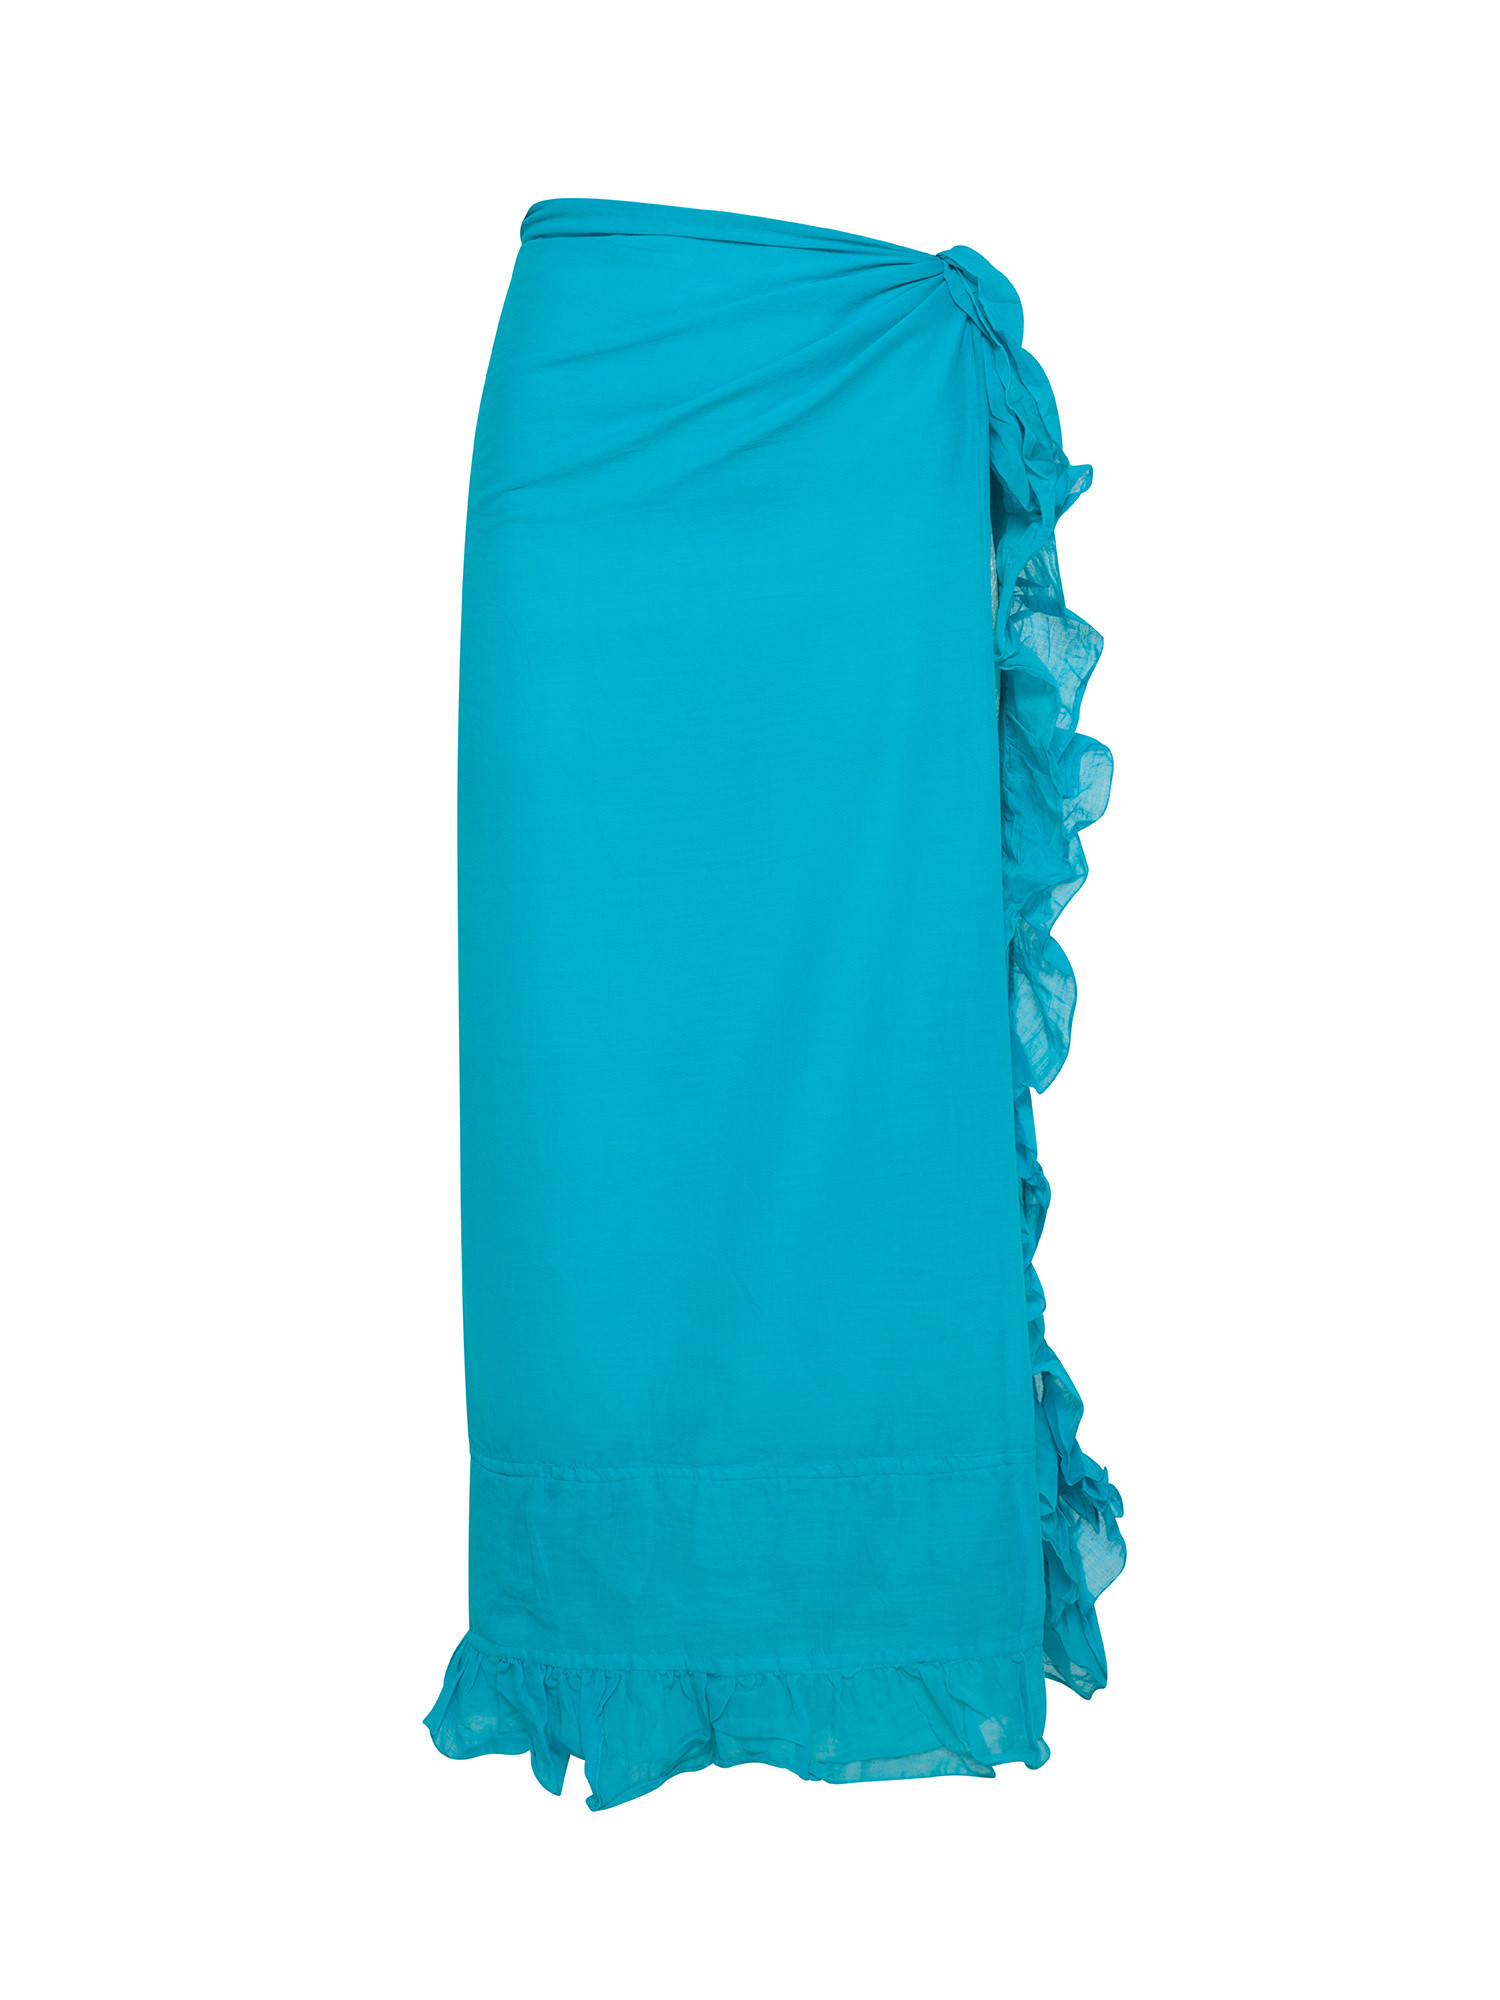 Koan - Sarong in cotton with ruffles, Turquoise, large image number 0